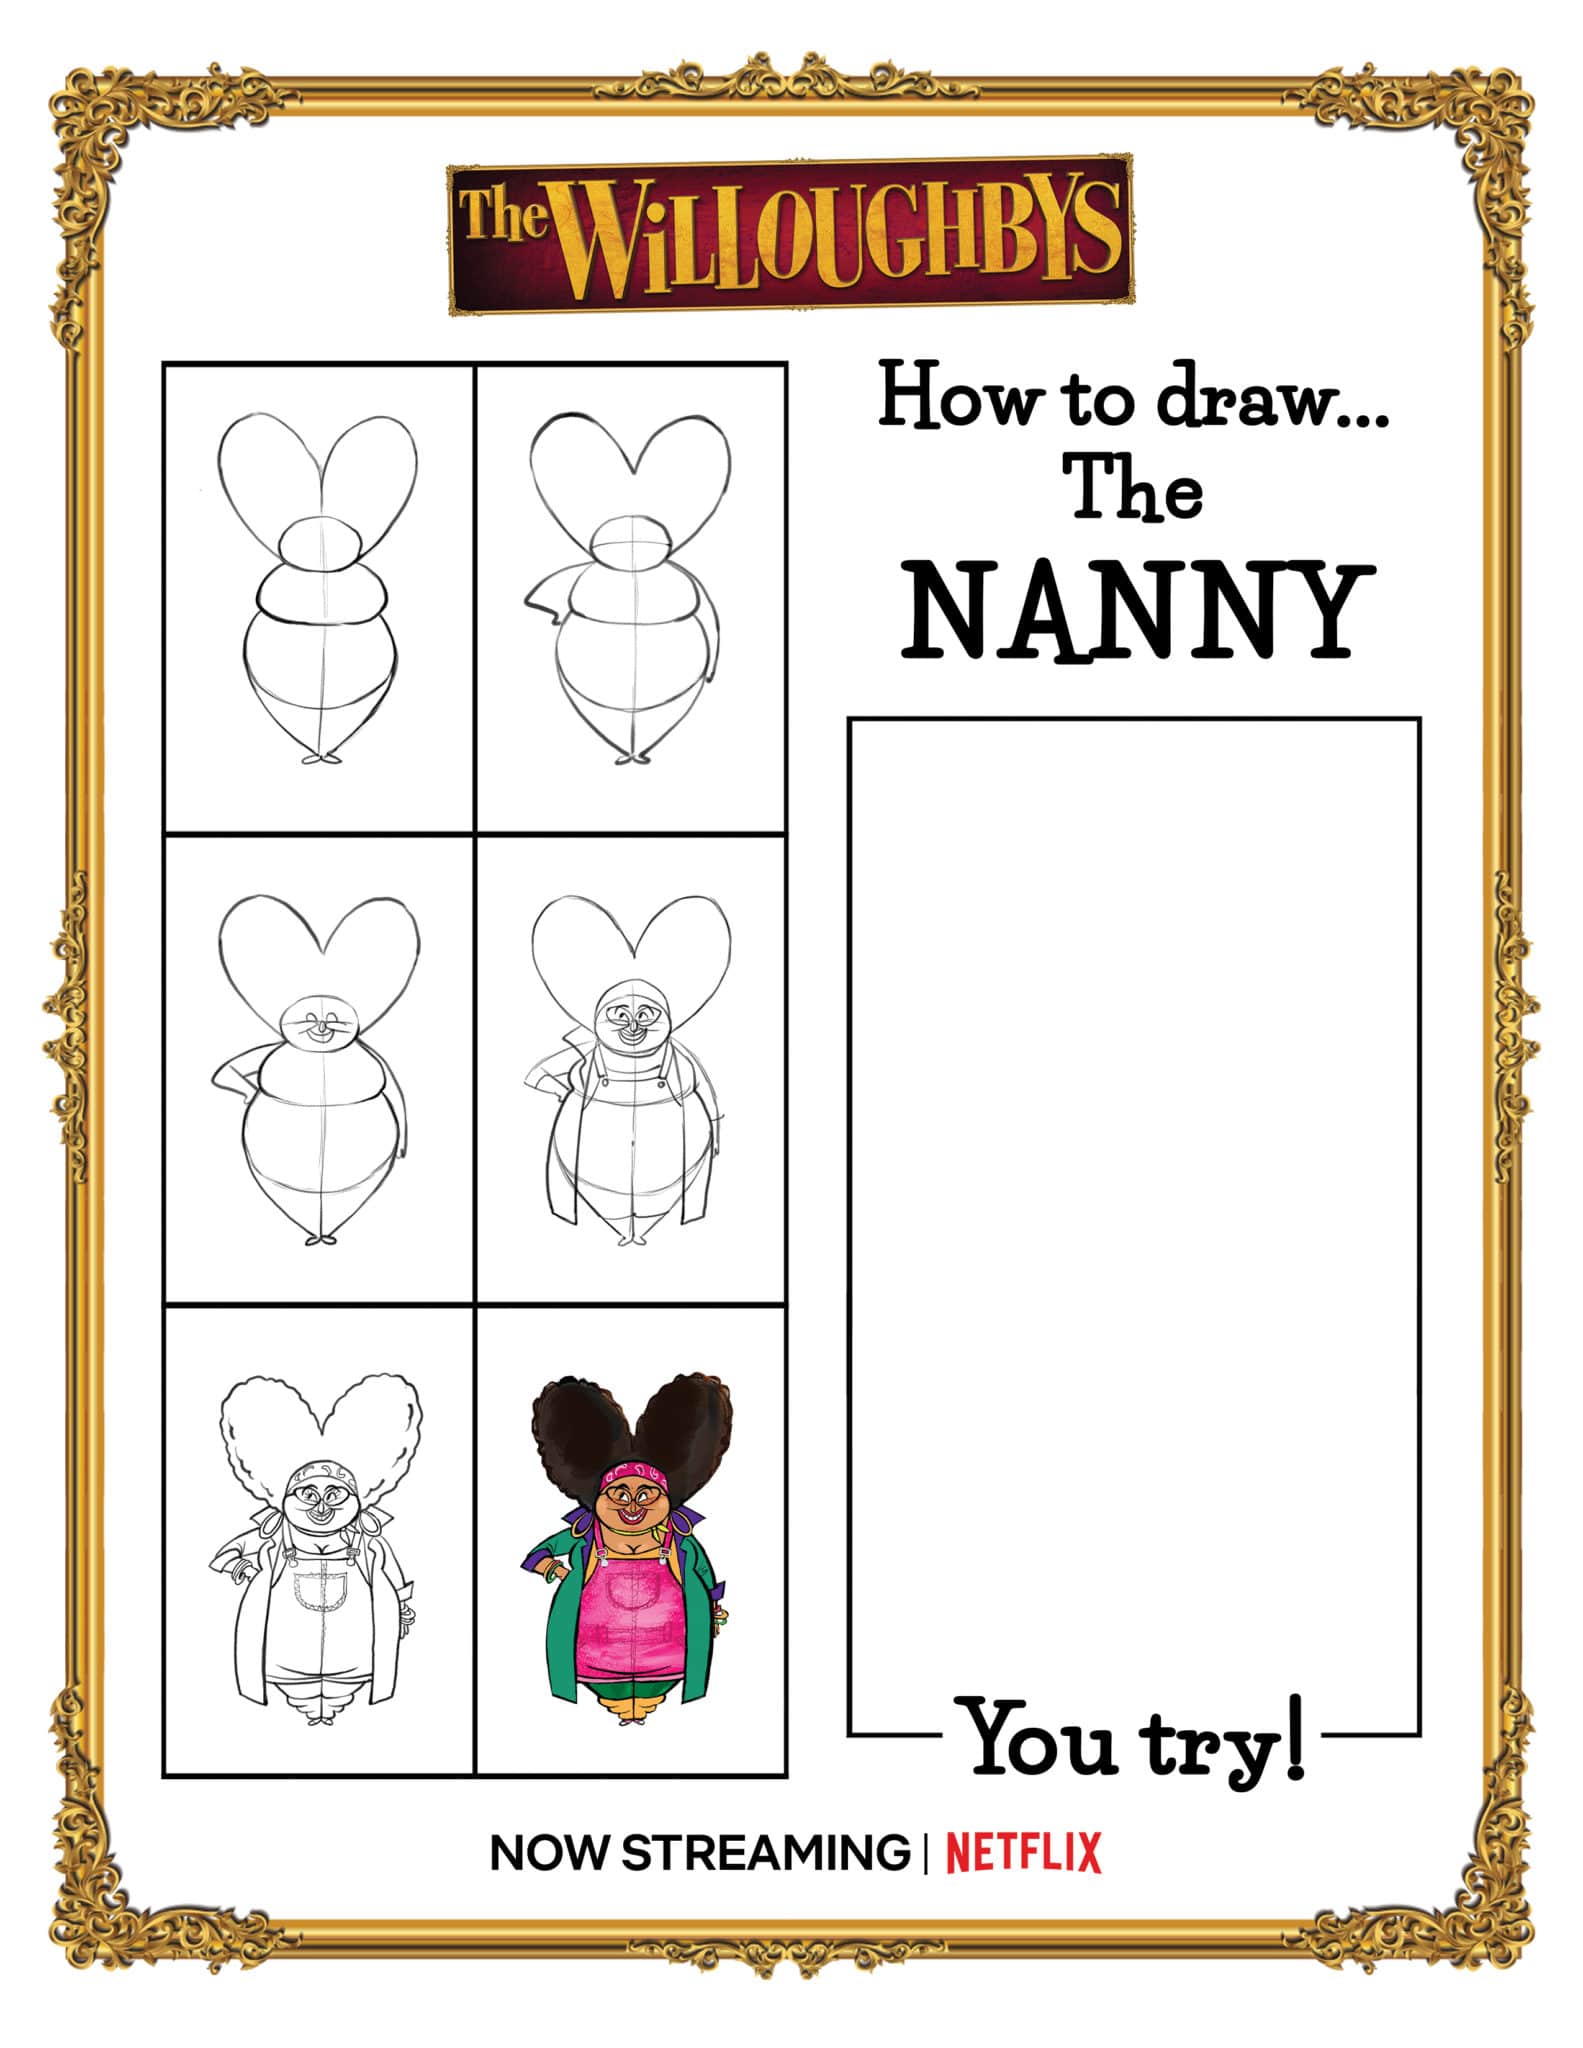 The Willoughbys How To Draw The Nanny Activity Sheet